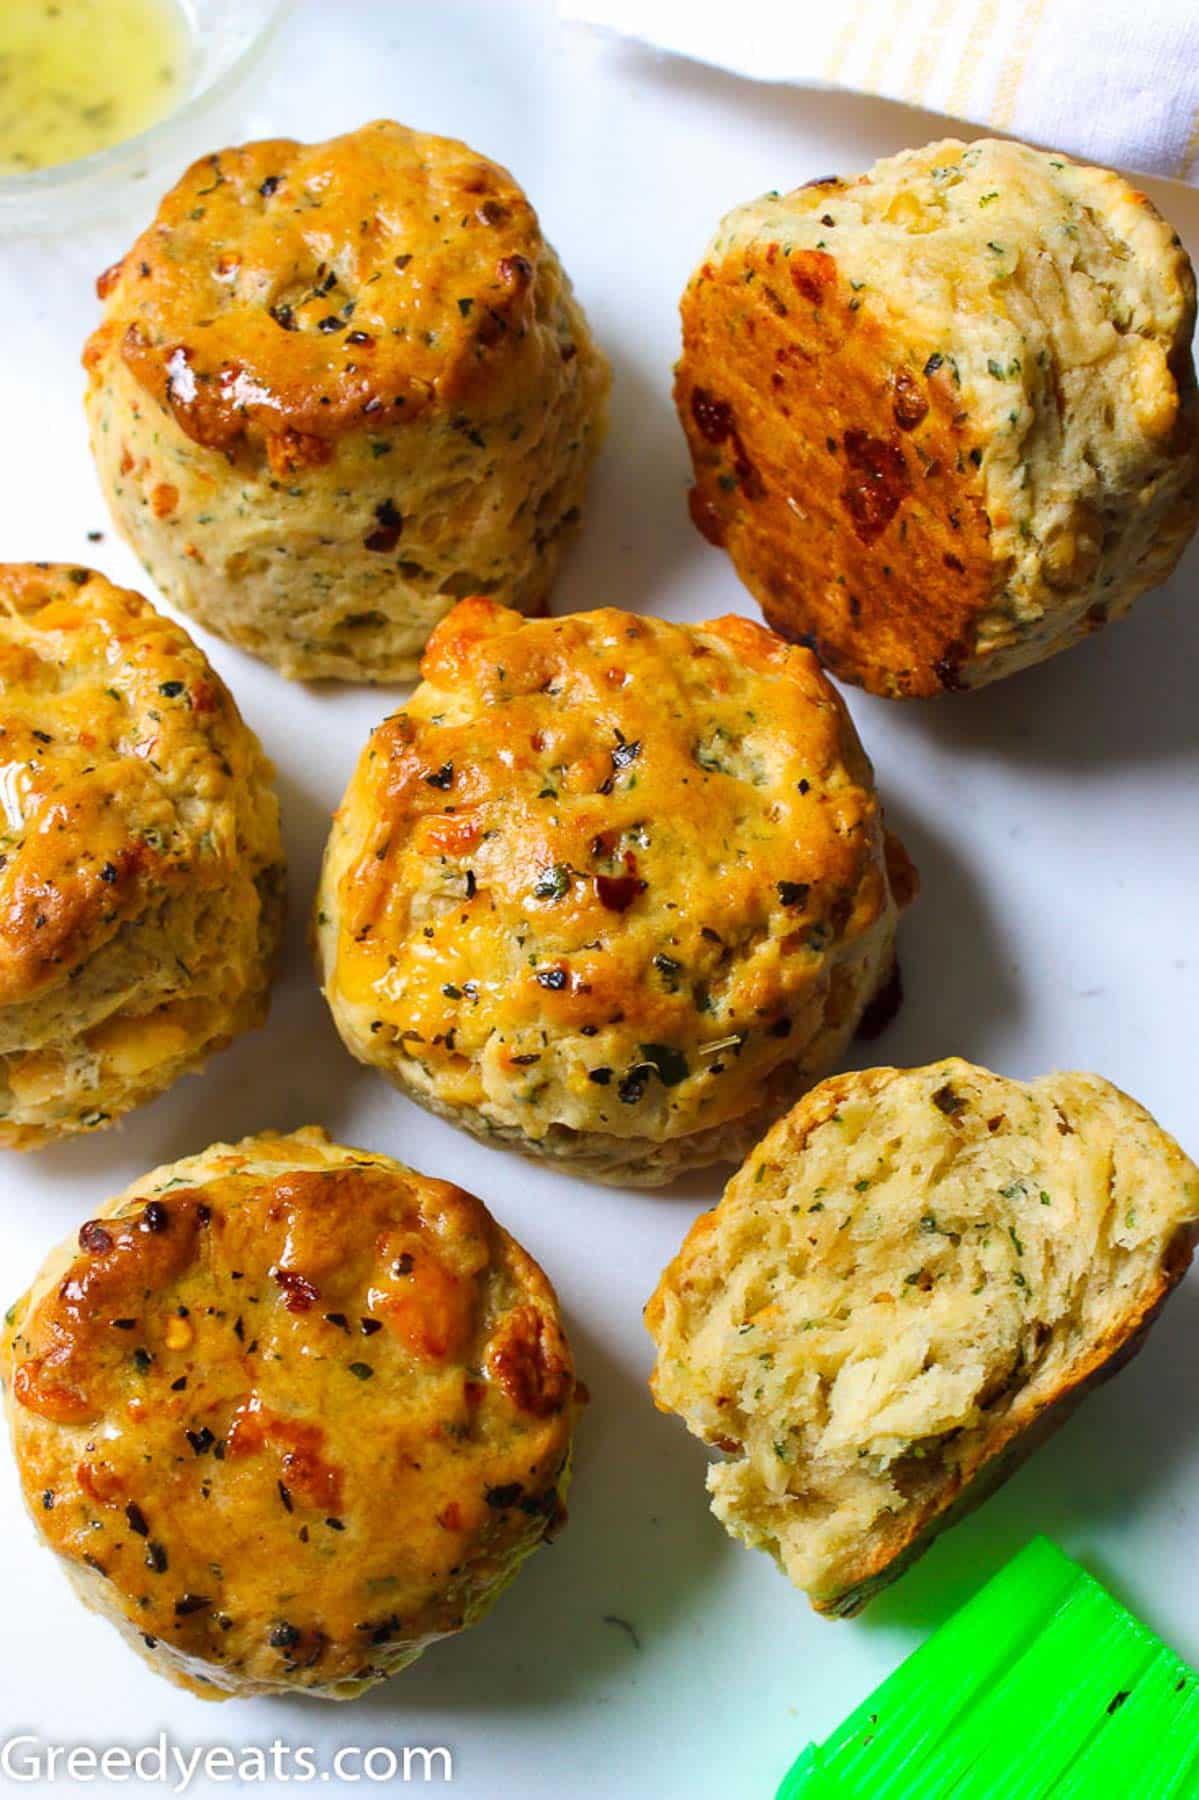 This Cheese biscuits recipe uses simple pantry ingredients, infused with fresh garlic and is so cheesy.